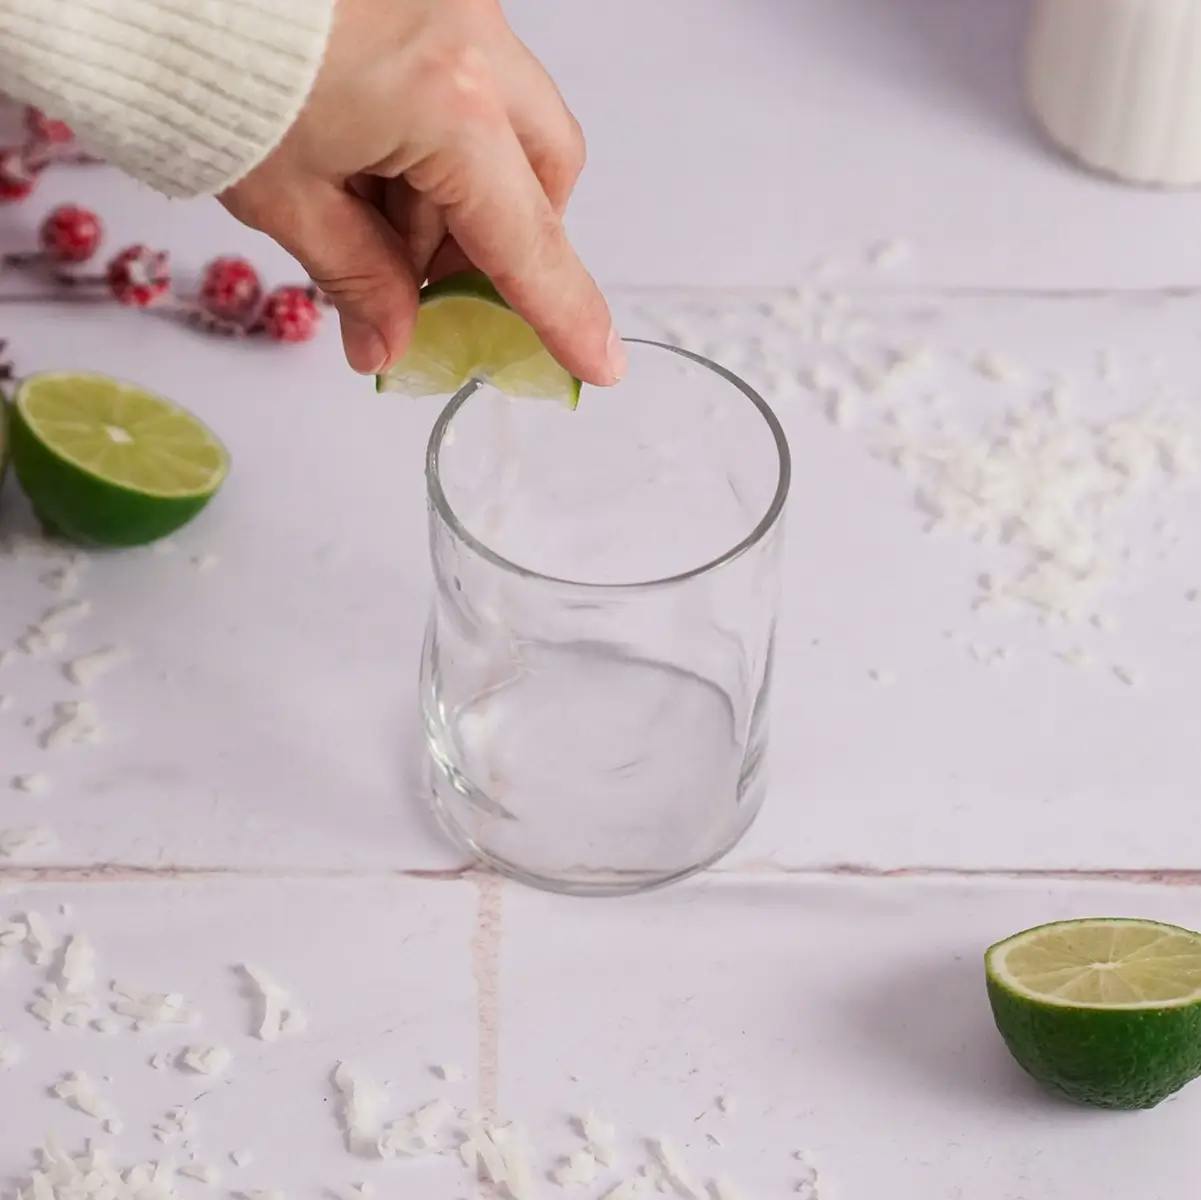 A hand using a lime to wet the rim of a glass ready for a Christmas margarita.